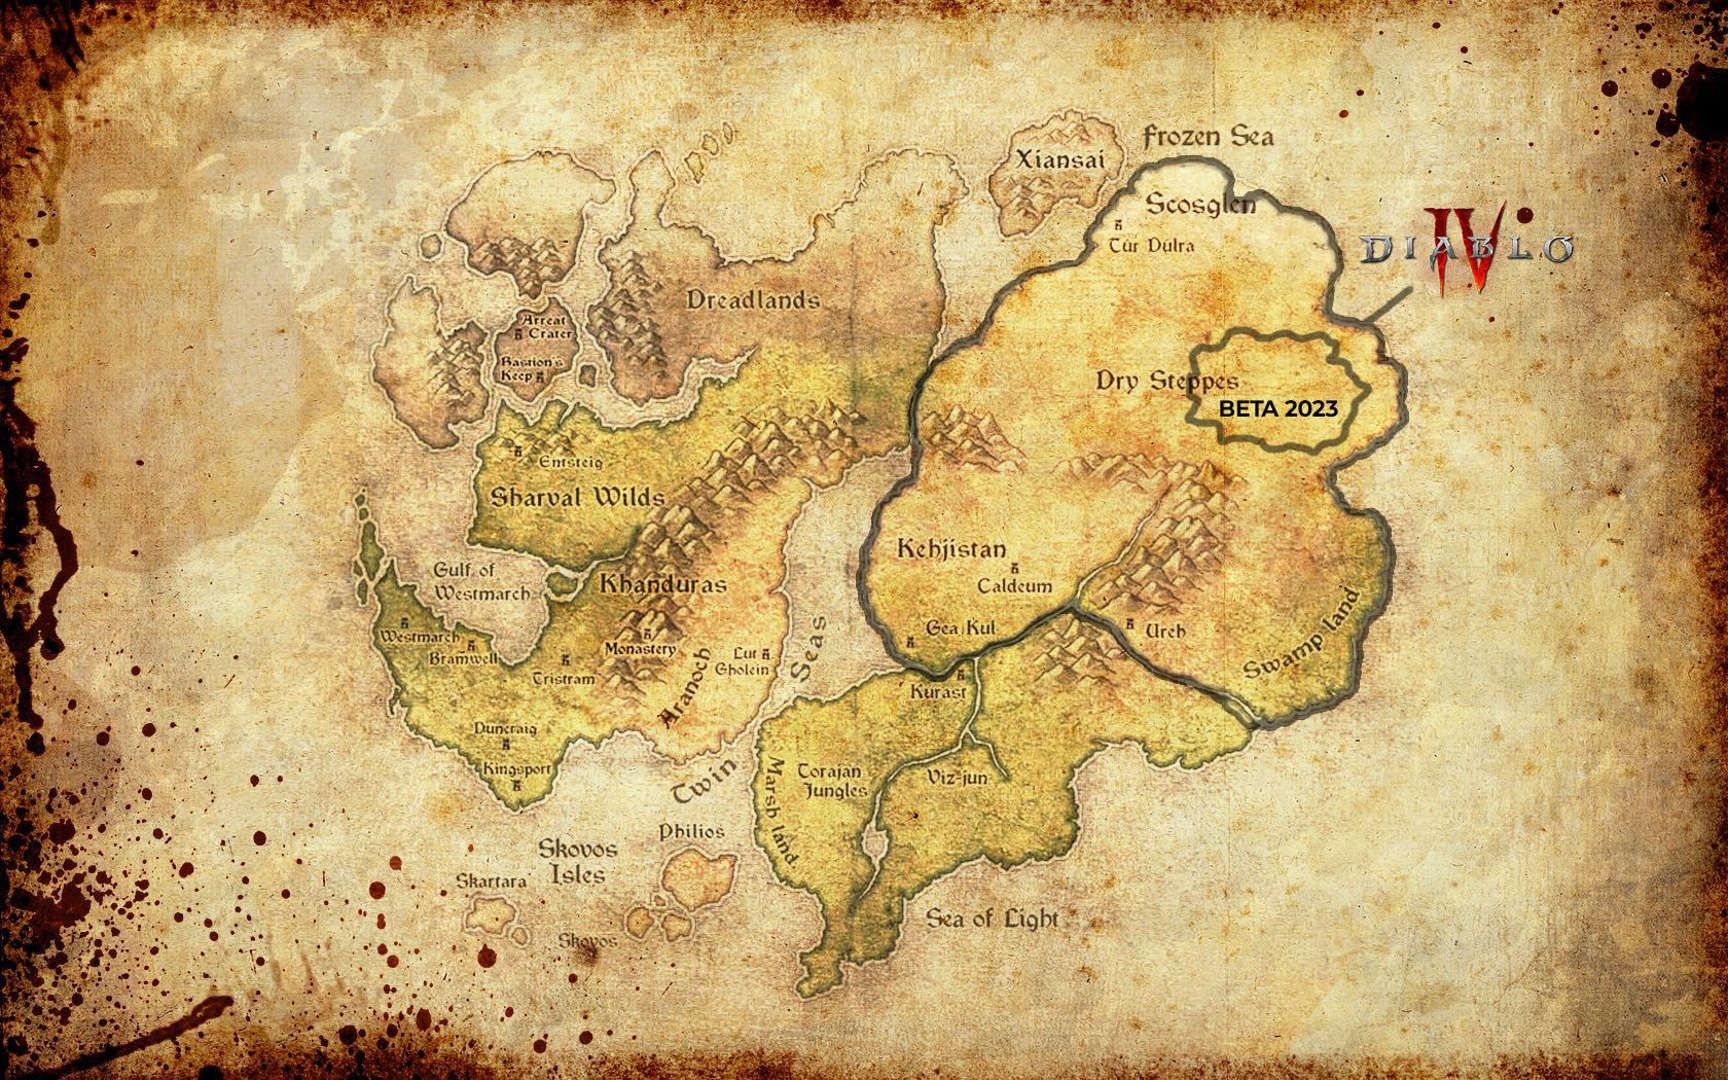 The Diablo 4 open world map is HUGE. This map shows the entire world with a beta region highlighted to show true scale